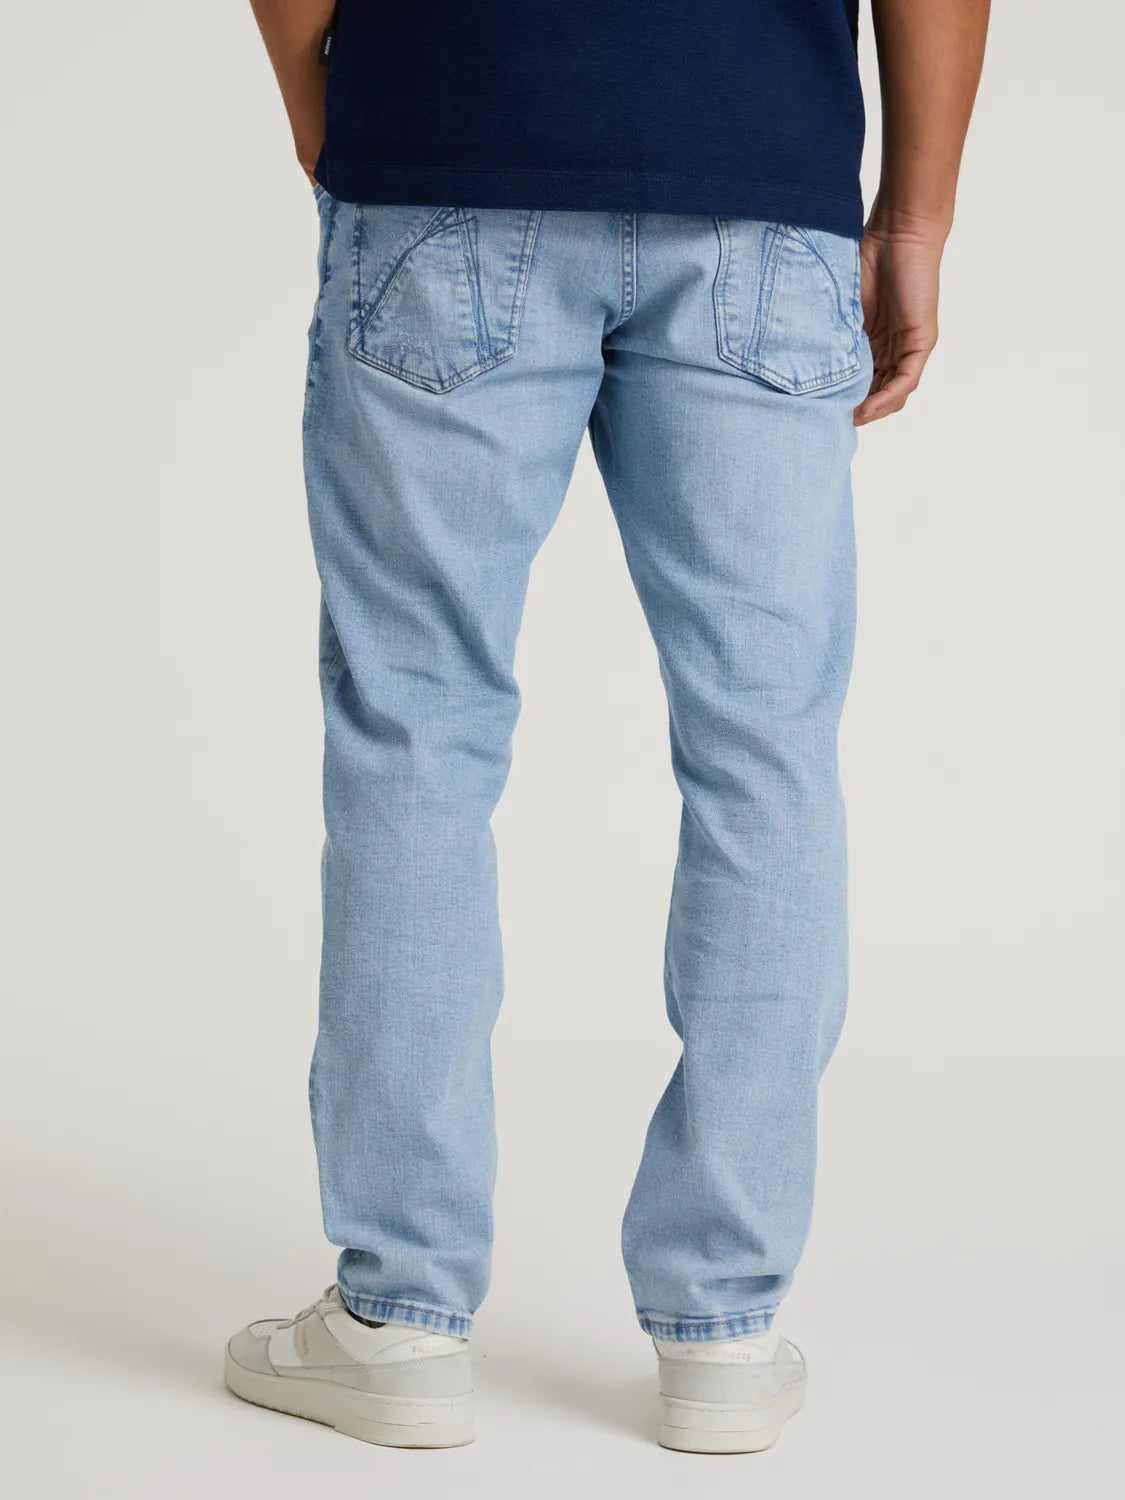 CHASIN | Iron Crawford Jeans | D41 BLEACHED DAMAGED